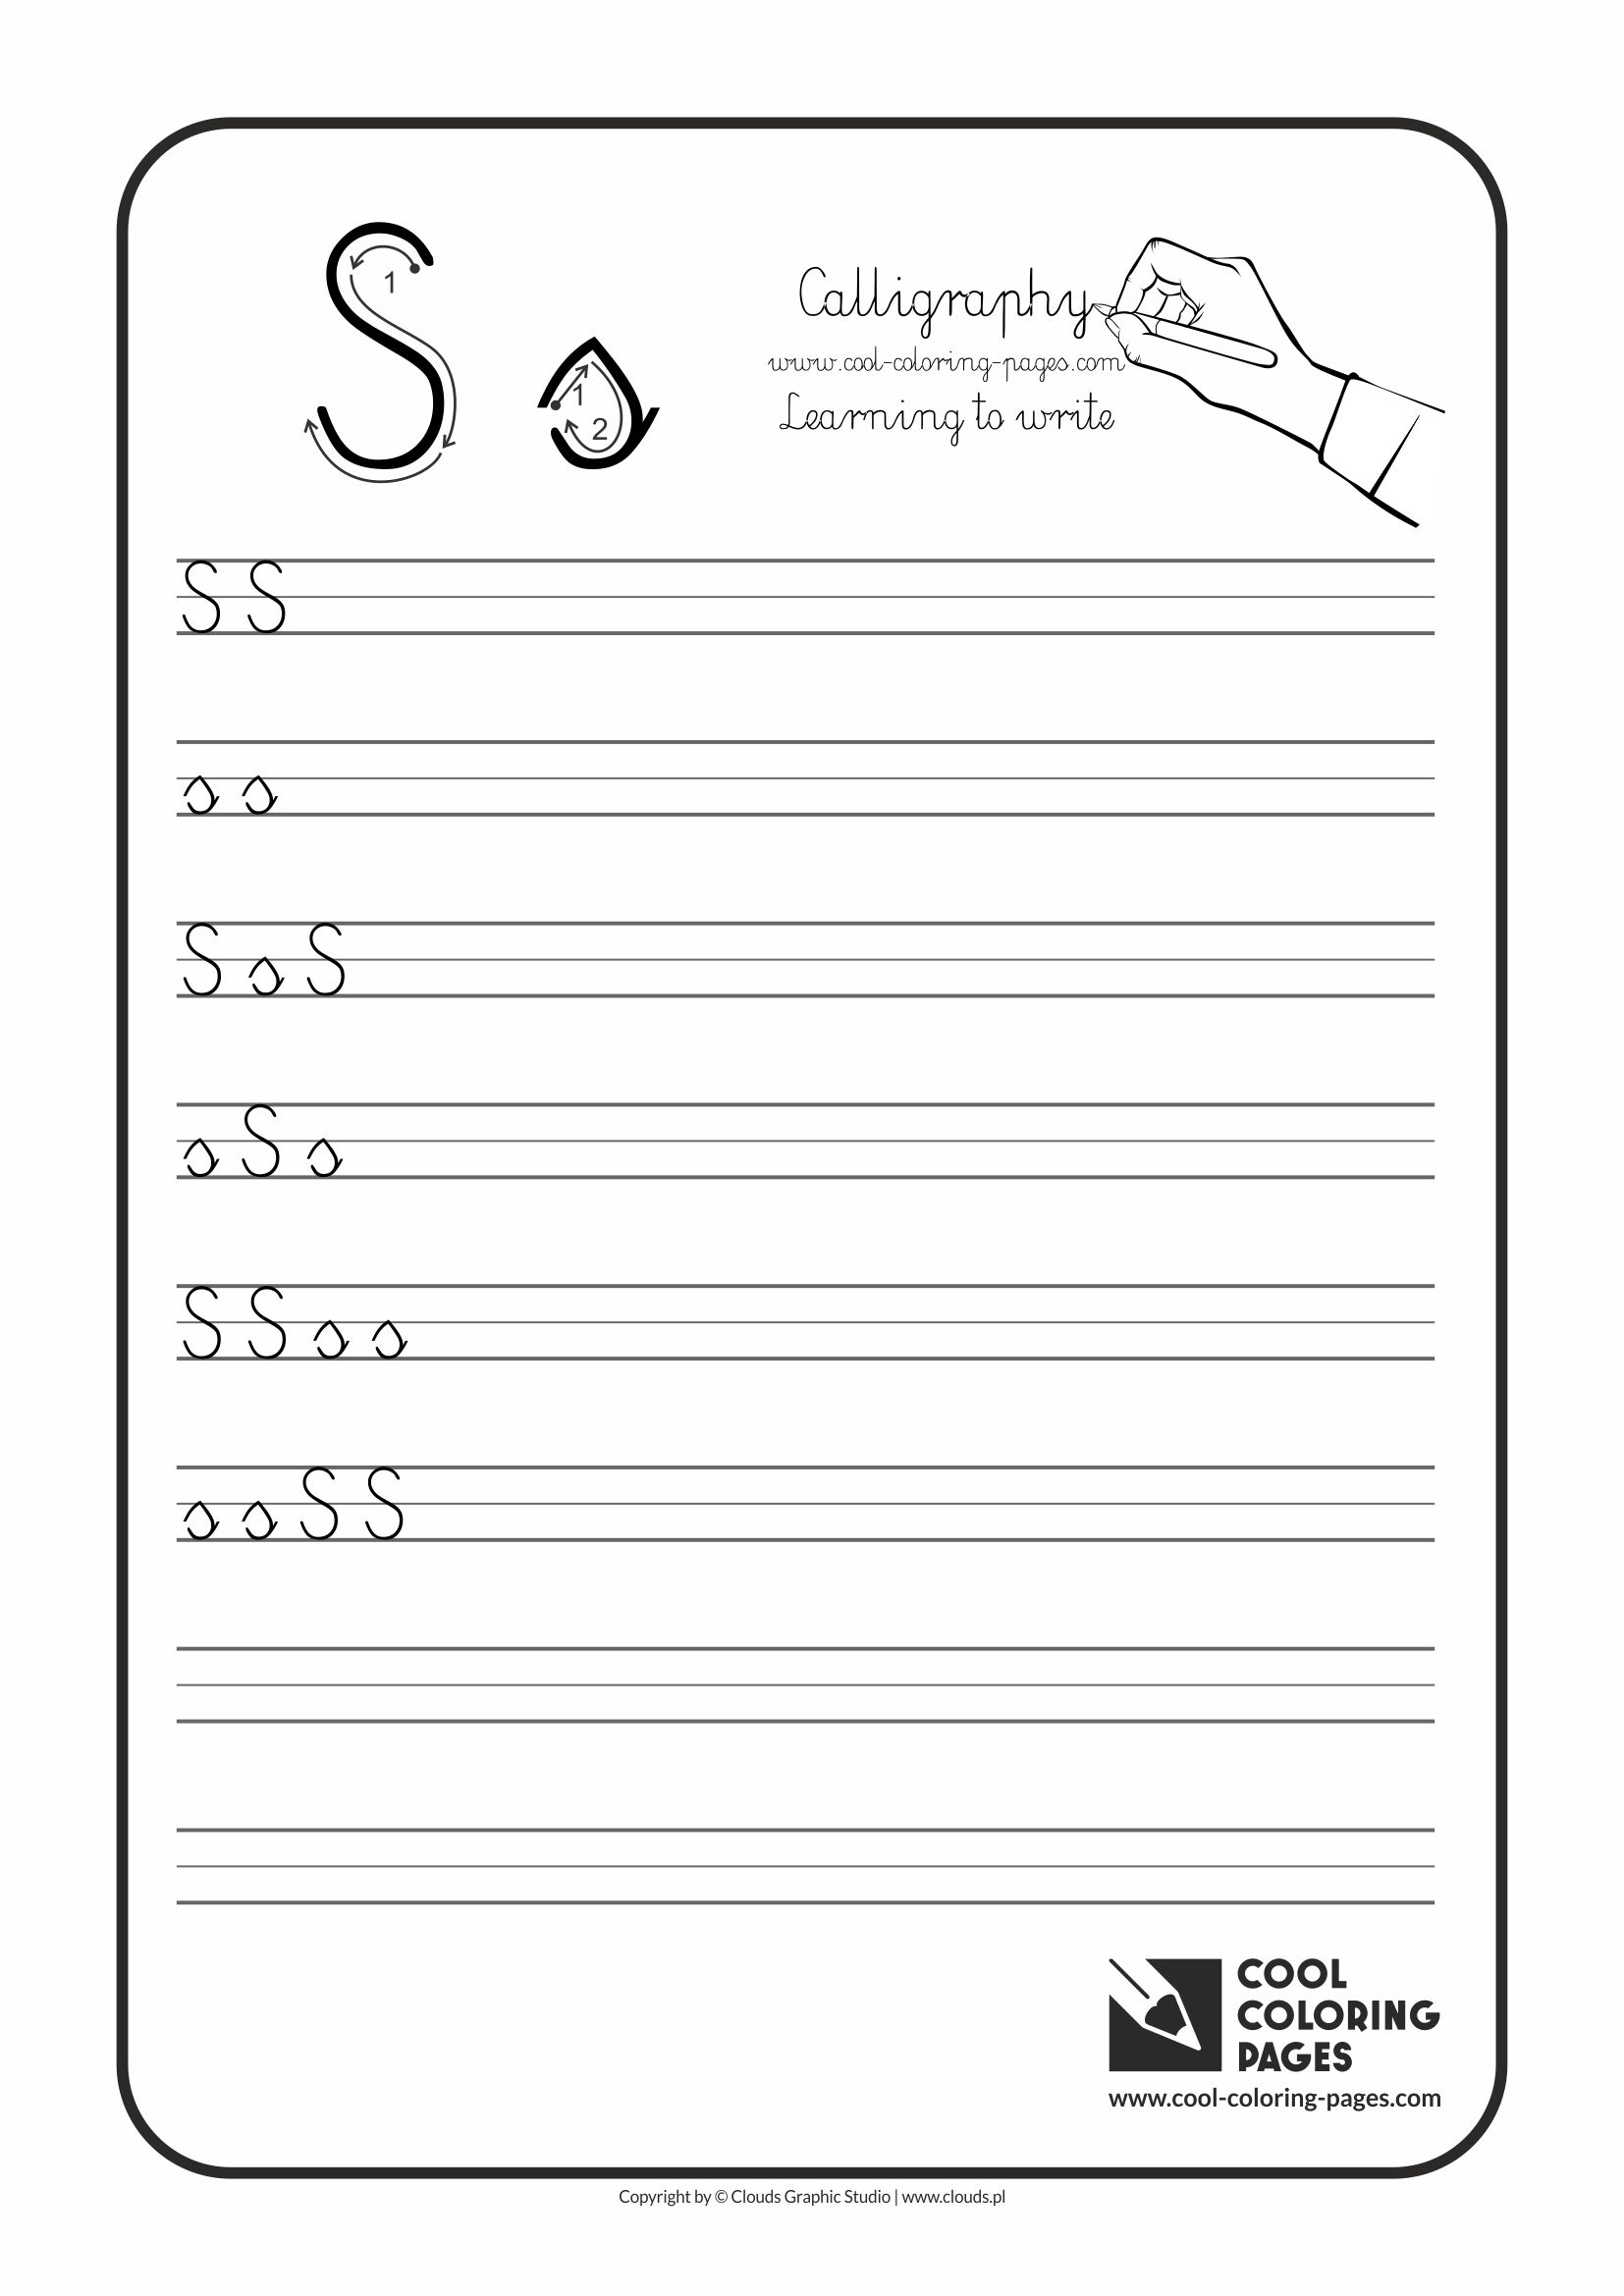 Cool Coloring Pages / Calligraphy / Letter S - Handwriting for kids / Worksheets